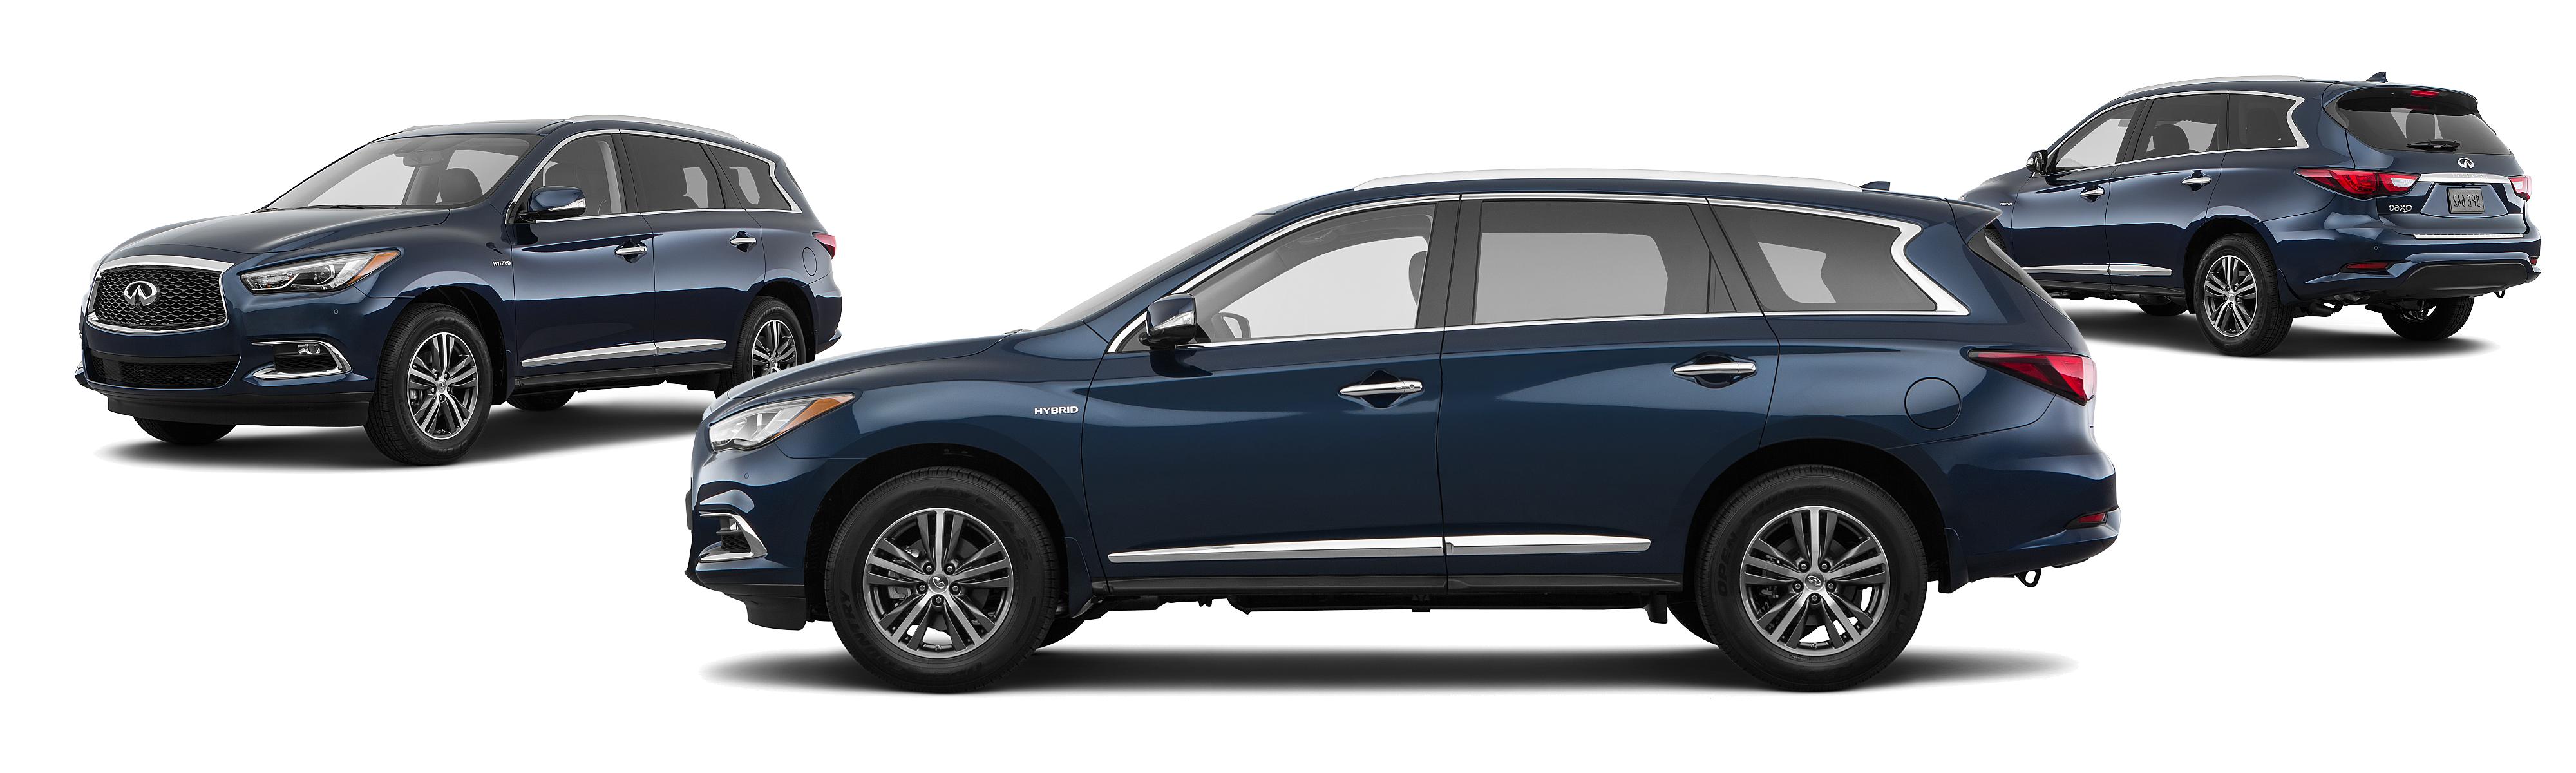 2017 INFINITI QX60 Hybrid 4dr SUV - Research - GrooveCar